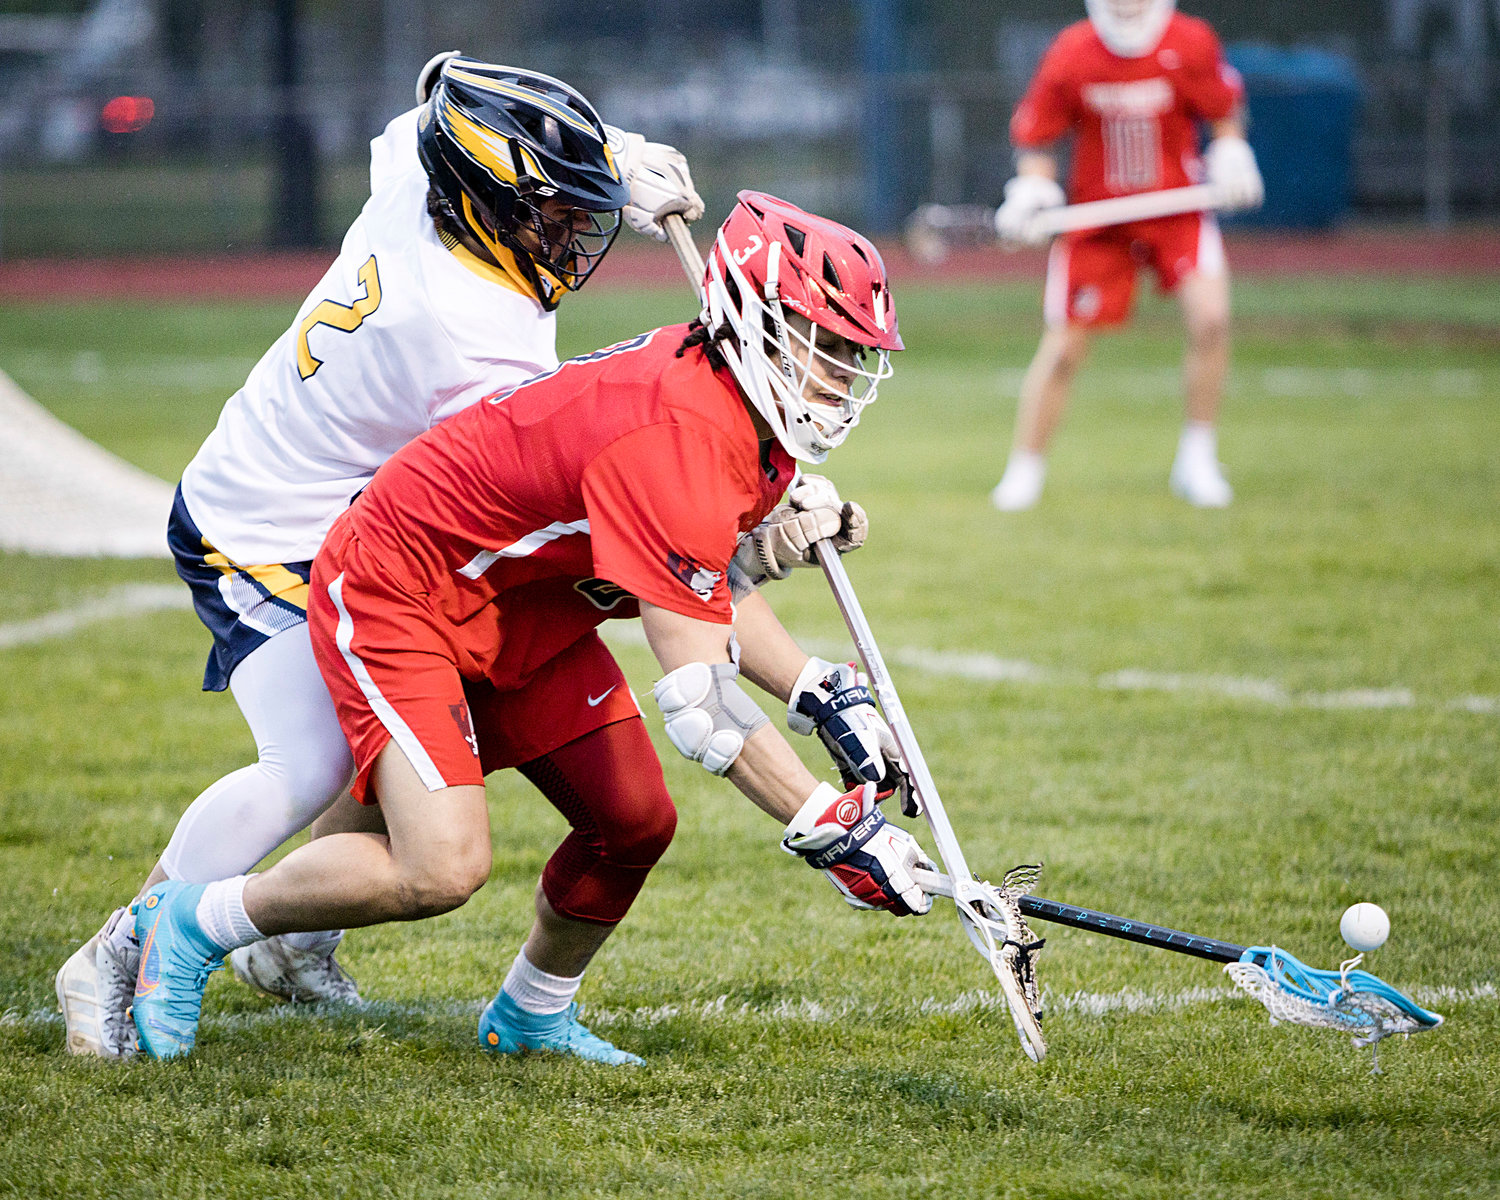 Marcus Evans battles a Barrington opponent for possession of a loose ball.